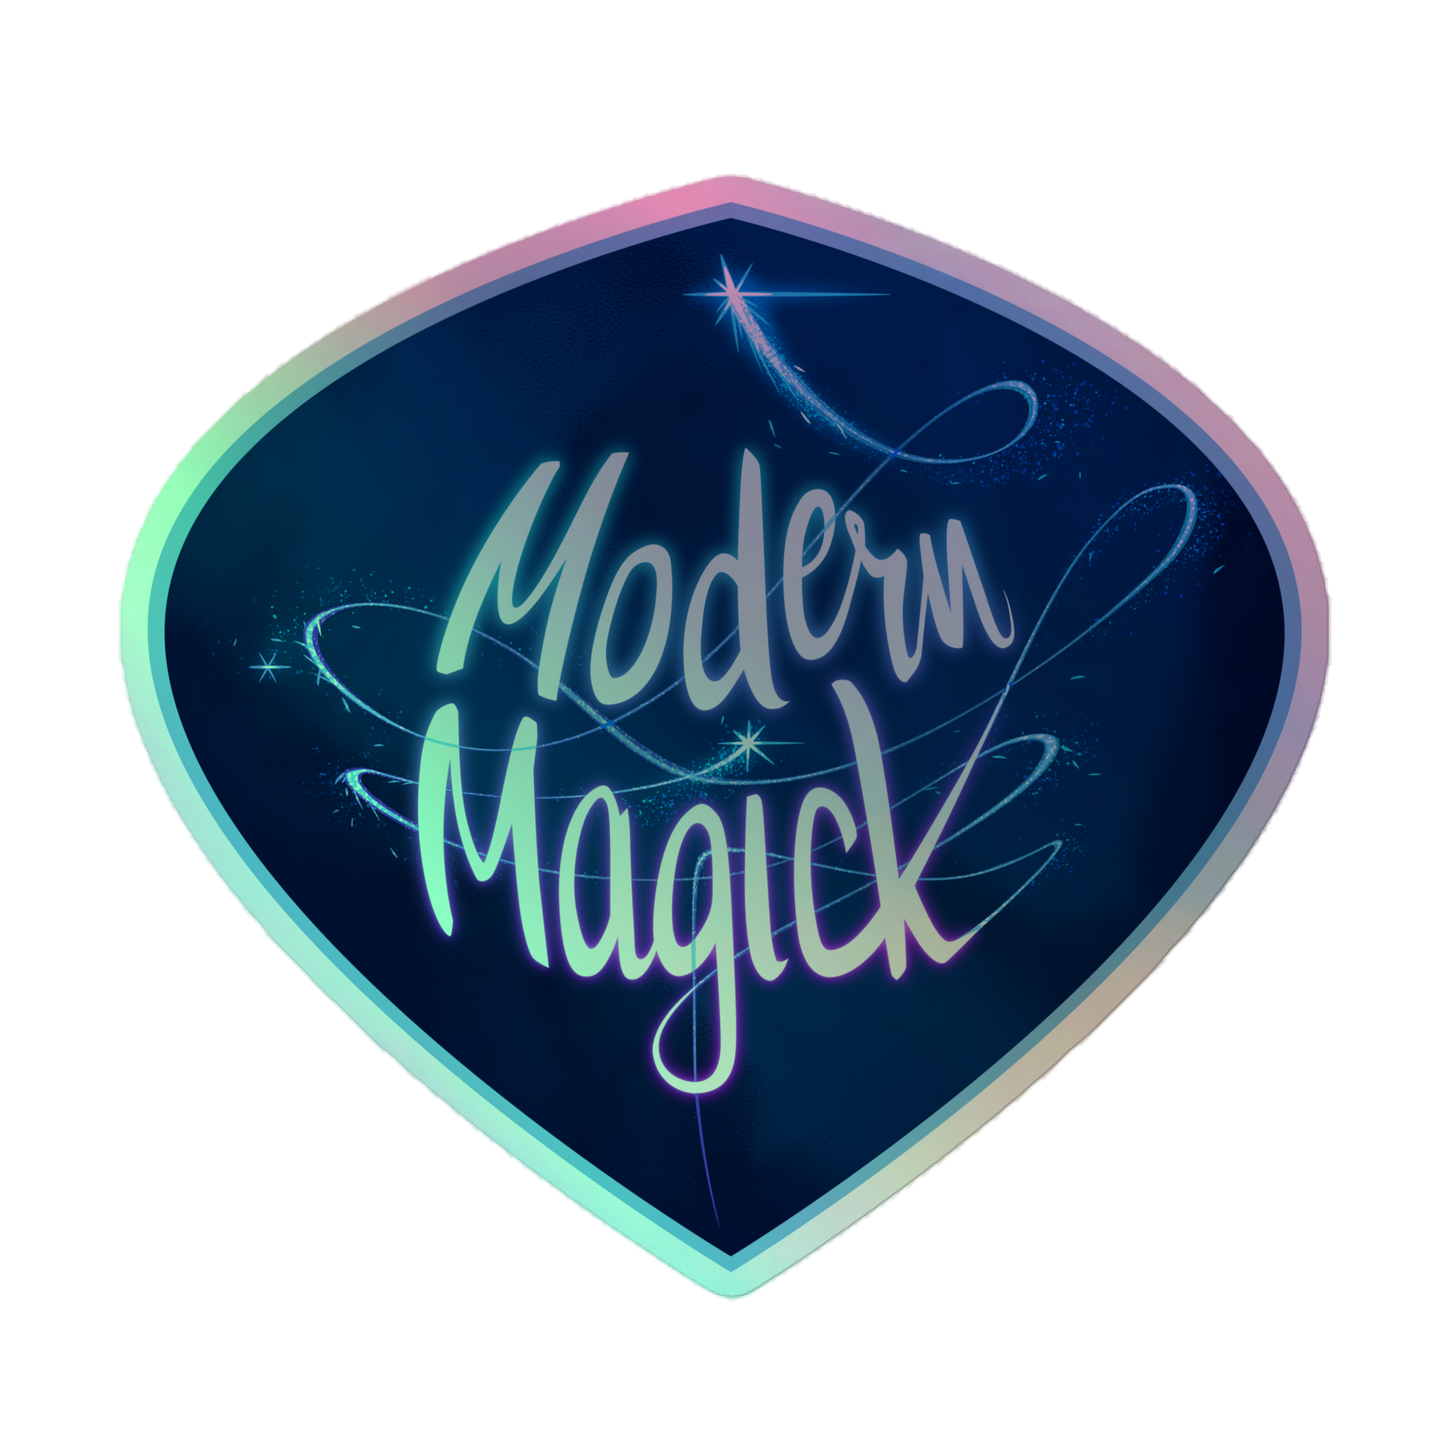 Modern Magick Holographic Stickers